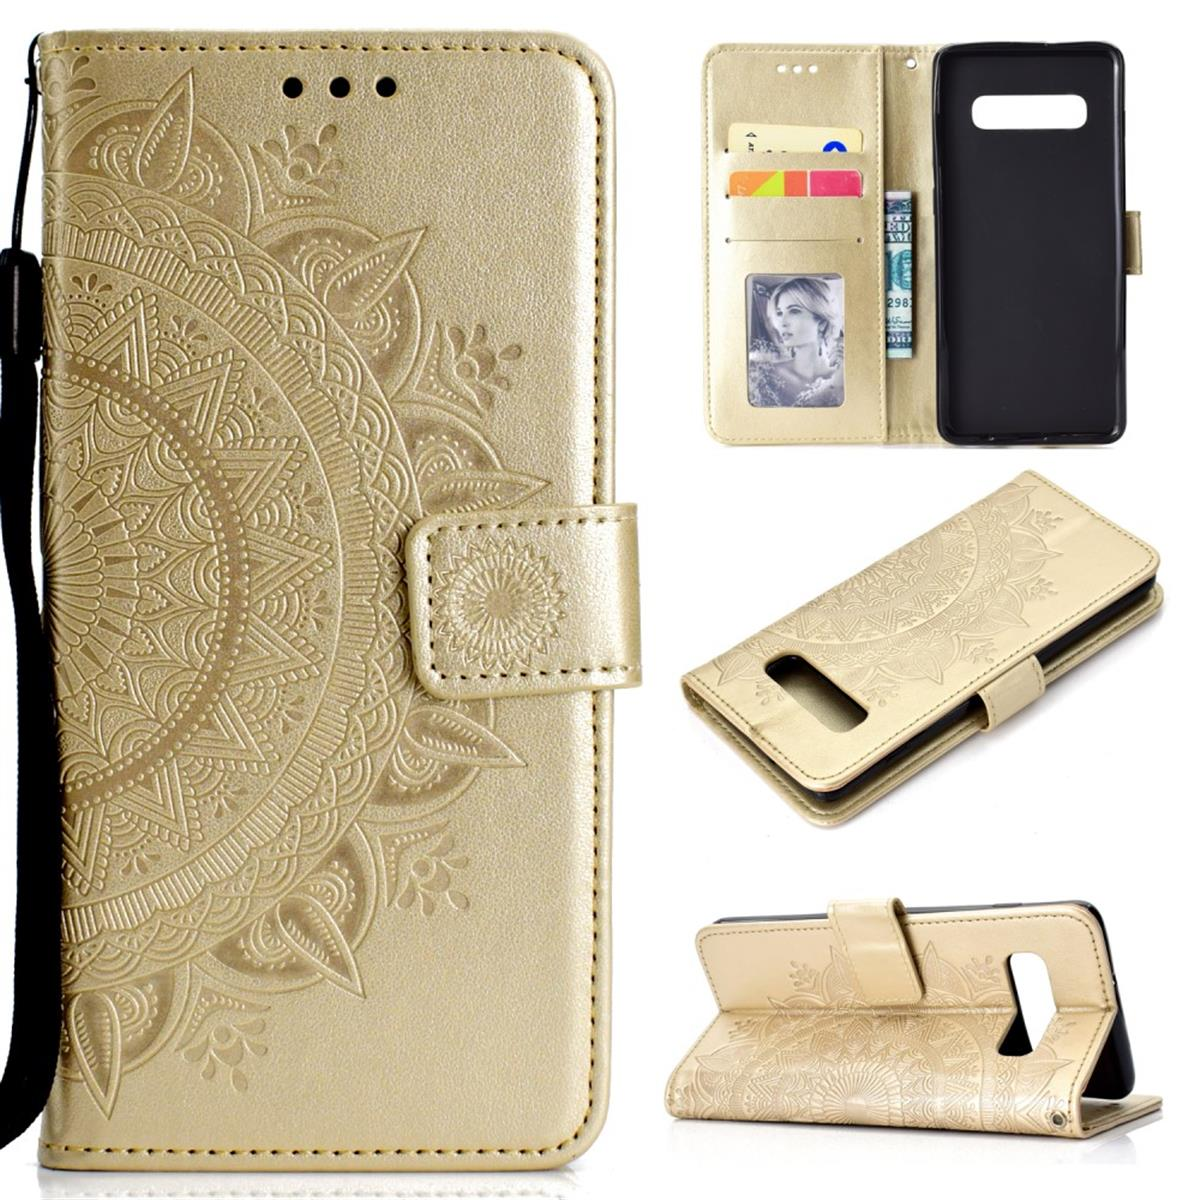 COVERKINGZ Klapphülle mit Galaxy S10+ [Plus], Mandala Gold Bookcover, Muster, Samsung